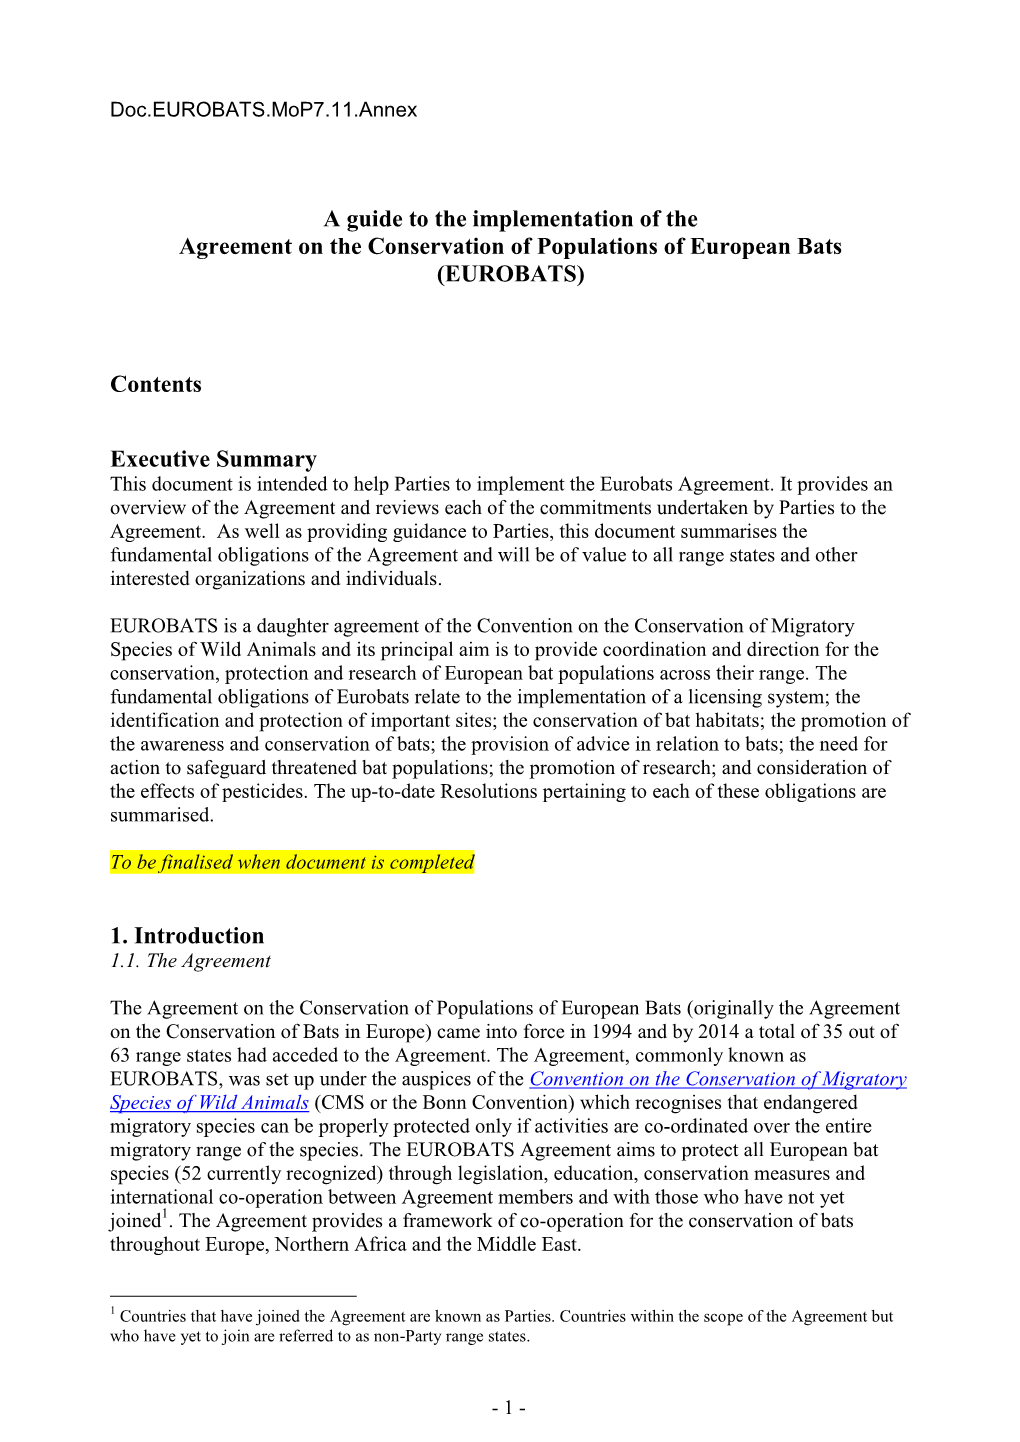 A Guide to the Implementation of the Agreement on the Conservation of Populations of European Bats (EUROBATS)